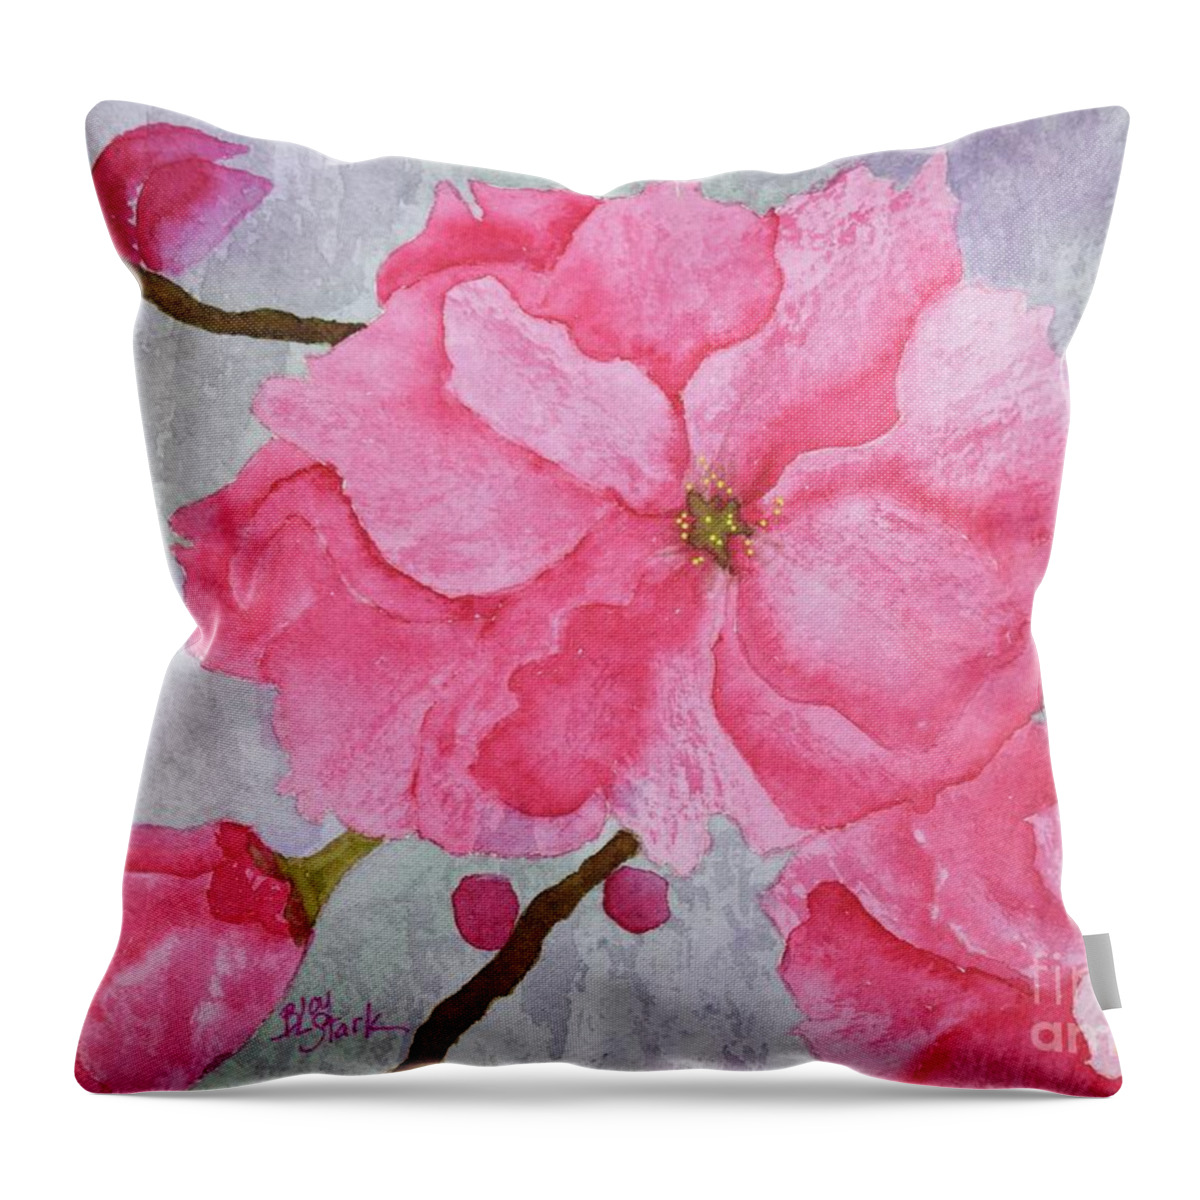 Barrieloustark Throw Pillow featuring the painting No.4 Cherry Blossoms by Barrie Stark